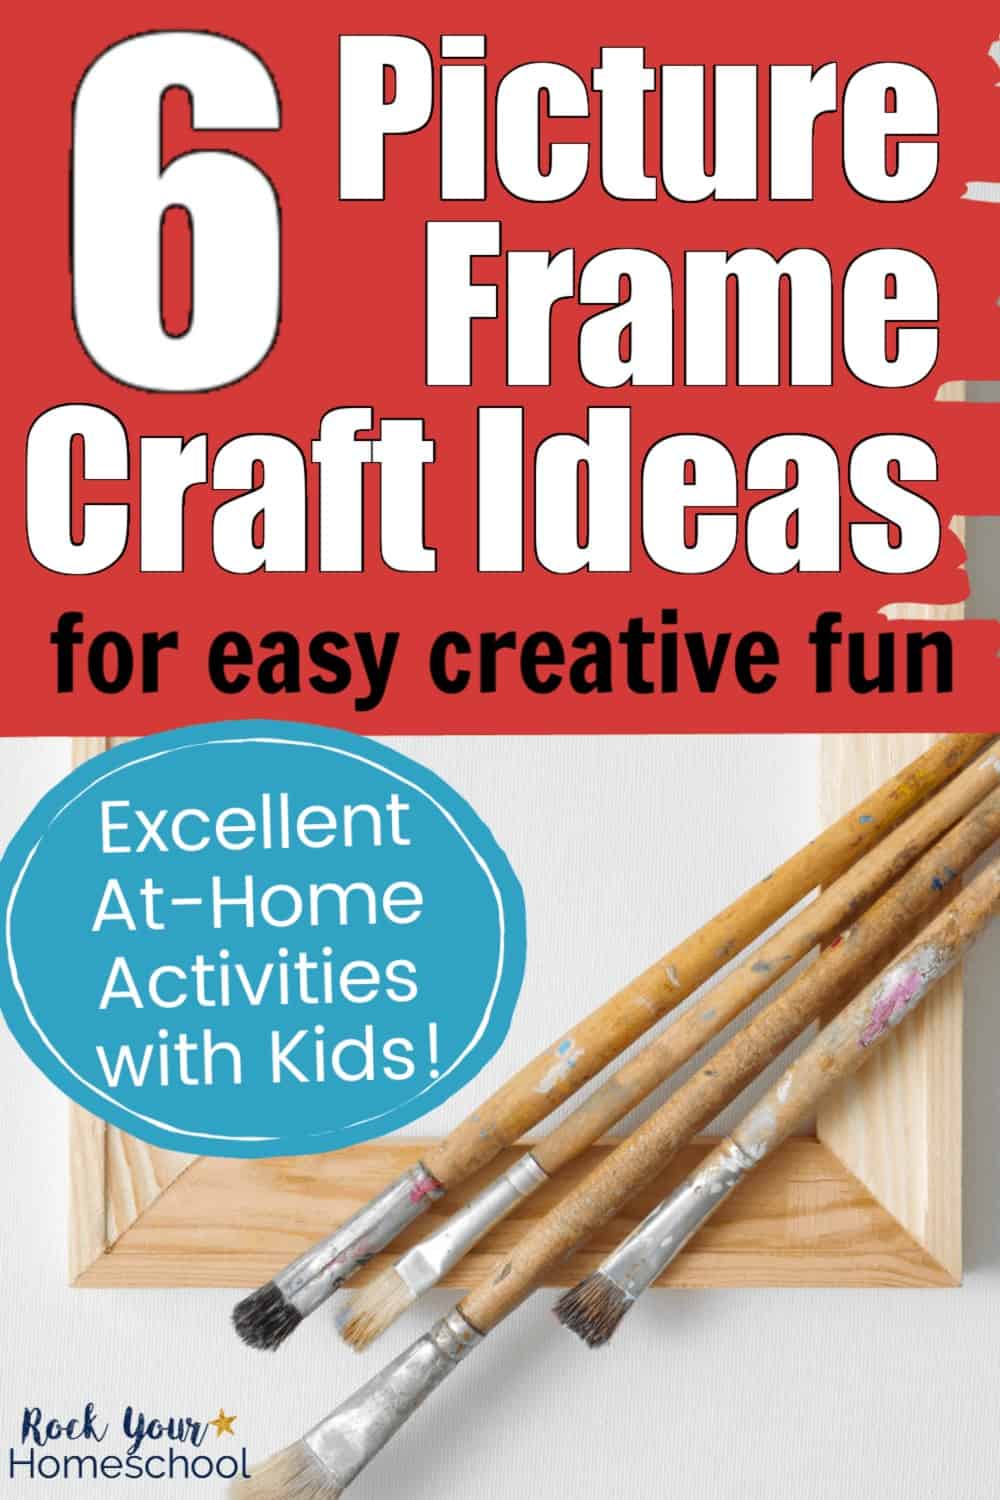 Enjoy Easy Creative Fun for Kids with 6 Picture Frame Craft Ideas